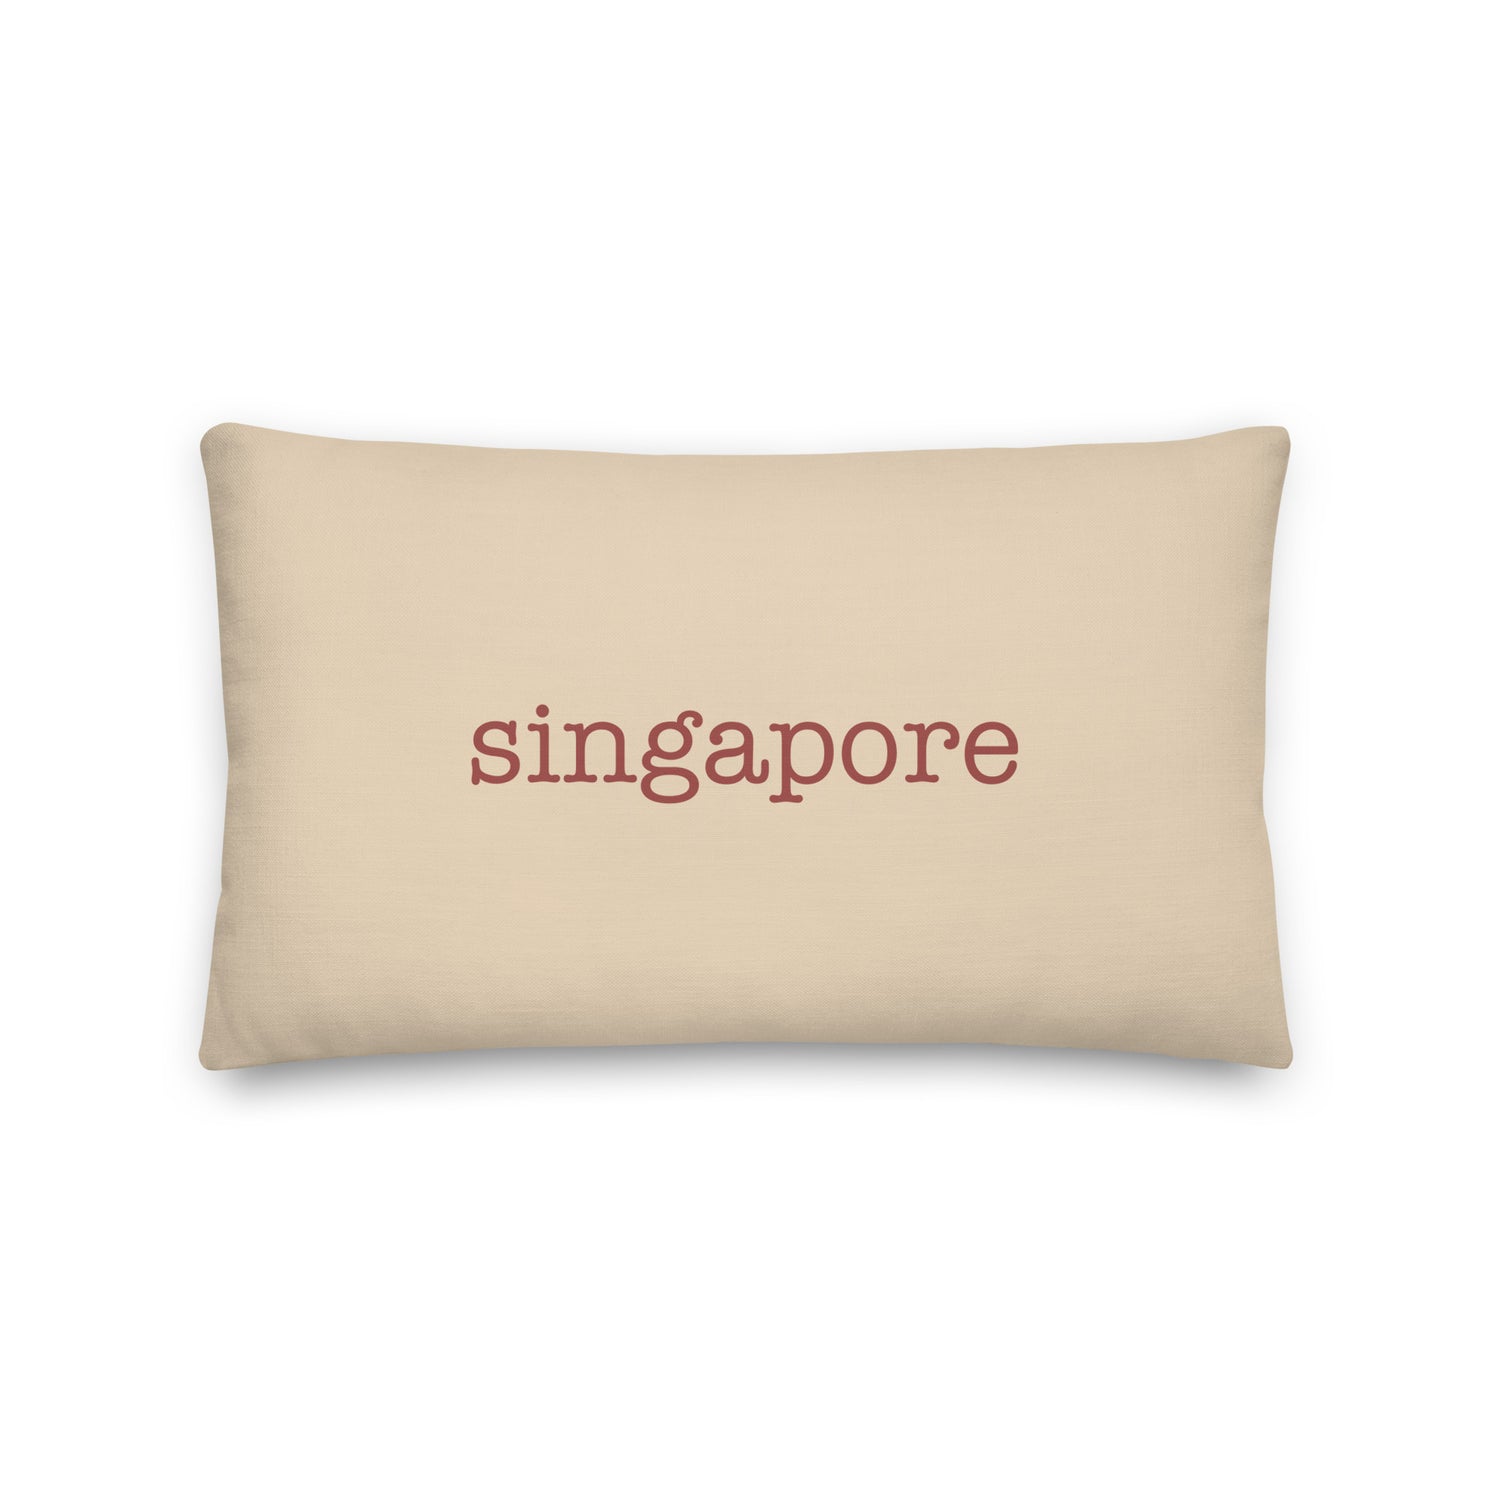 Singapore Pillows and Blankets • SIN Airport Code